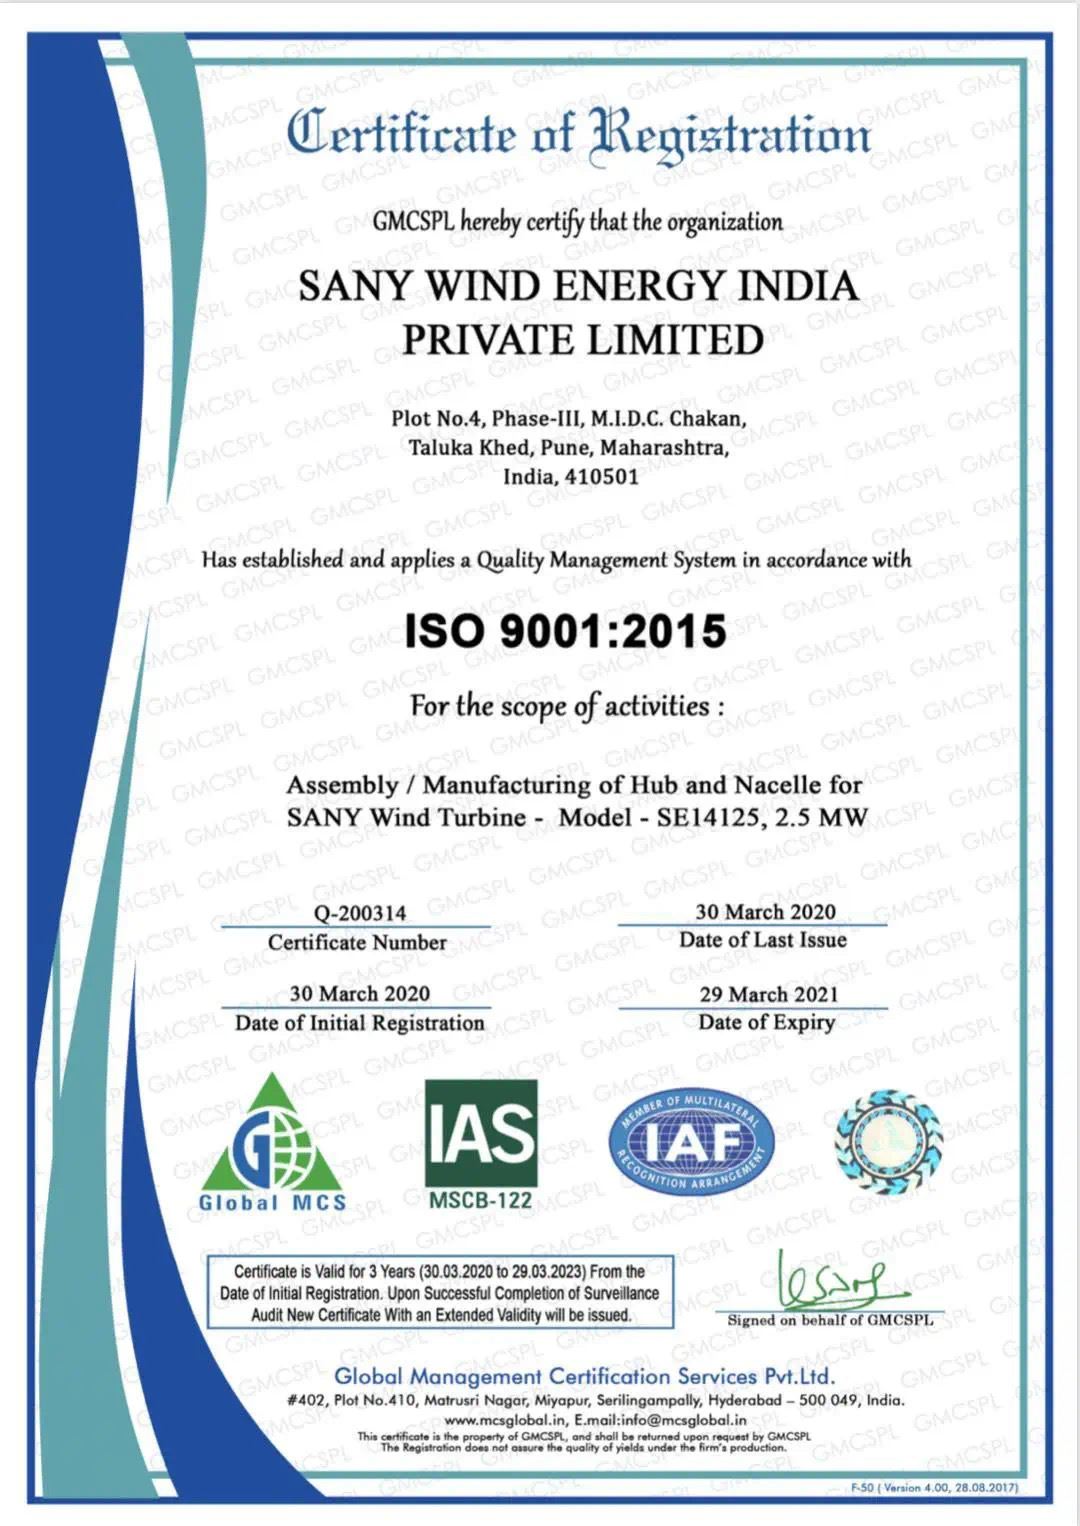 SANY Wind Energy India Obtains ISO 9001 Quality System Certification